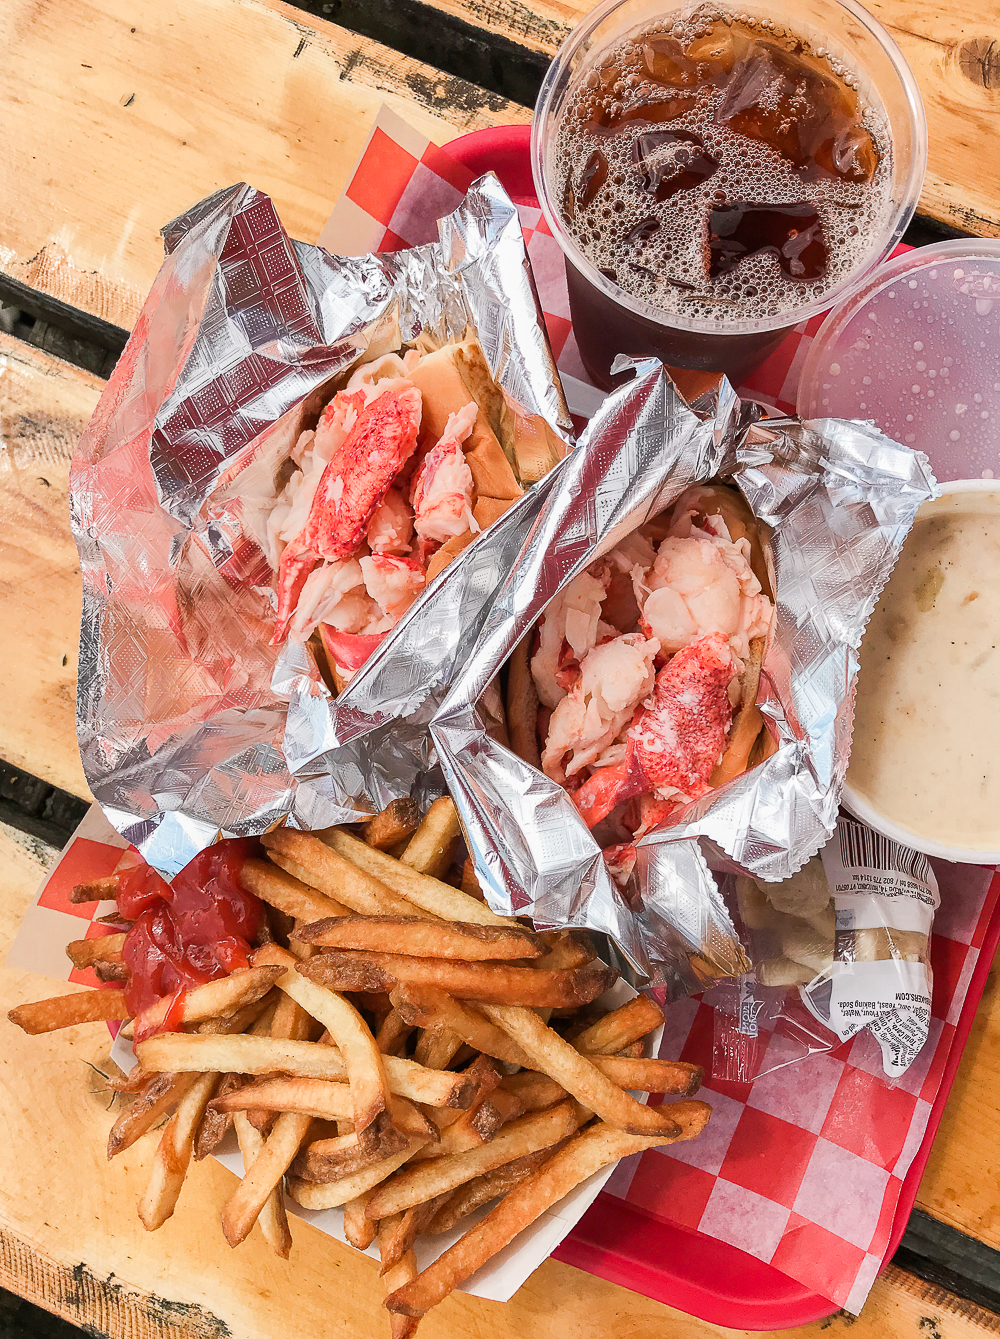 Maine vacation recap, Summer Bucket List: The Best Things to Do in Maine in Summer by southern lifestyle blogger Stephanie Ziajka from Diary of a Debutante, Maine bucket list, things to do in Maine, Sprague's lobster rolls in Wiscasset